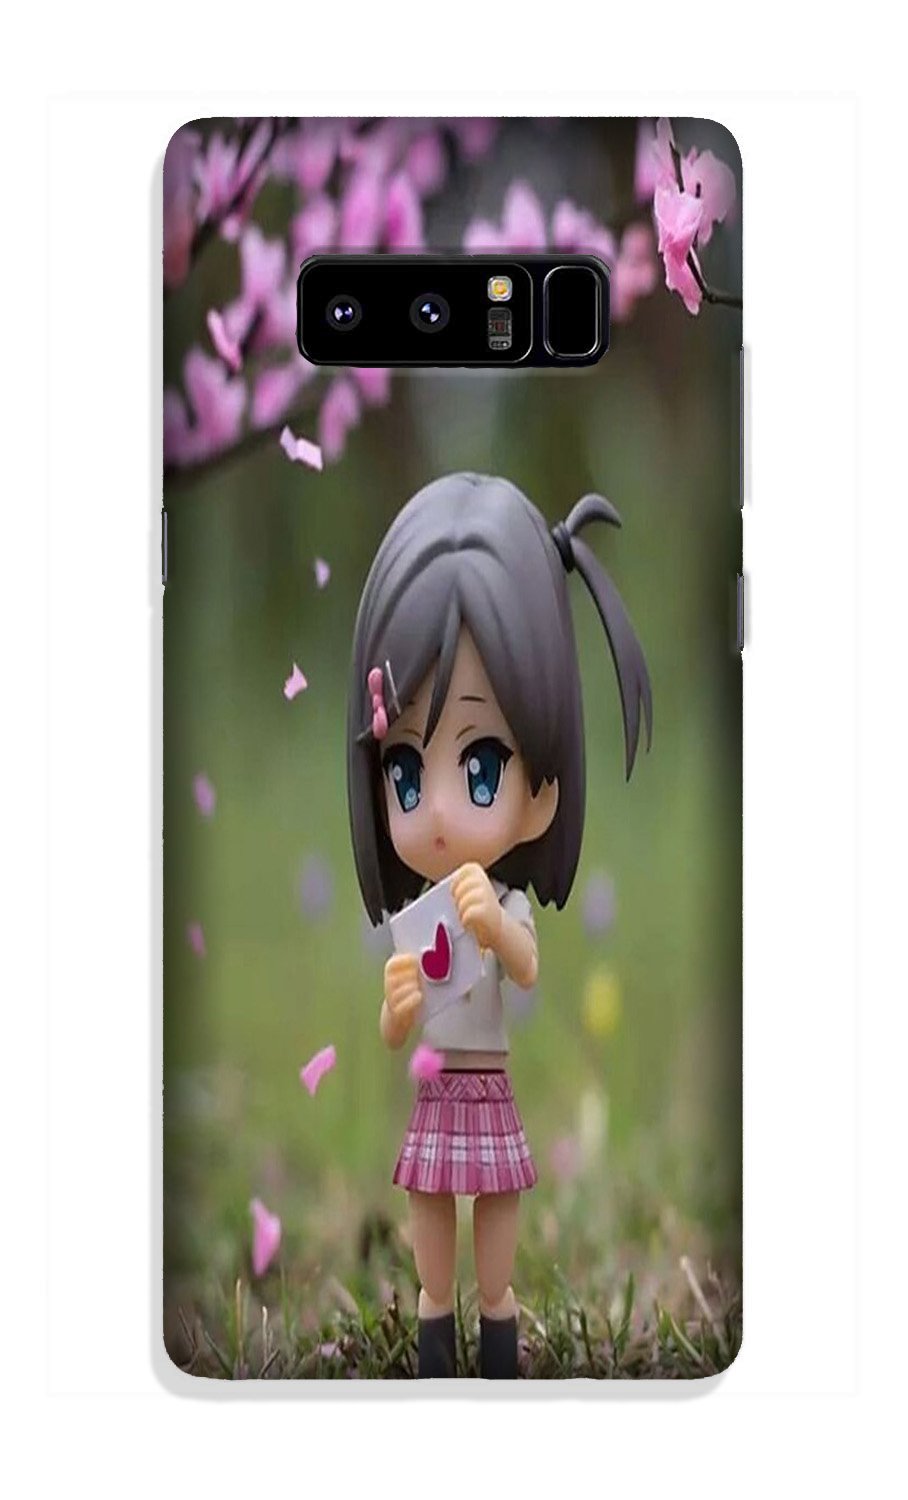 Cute Girl Case for Galaxy Note 8